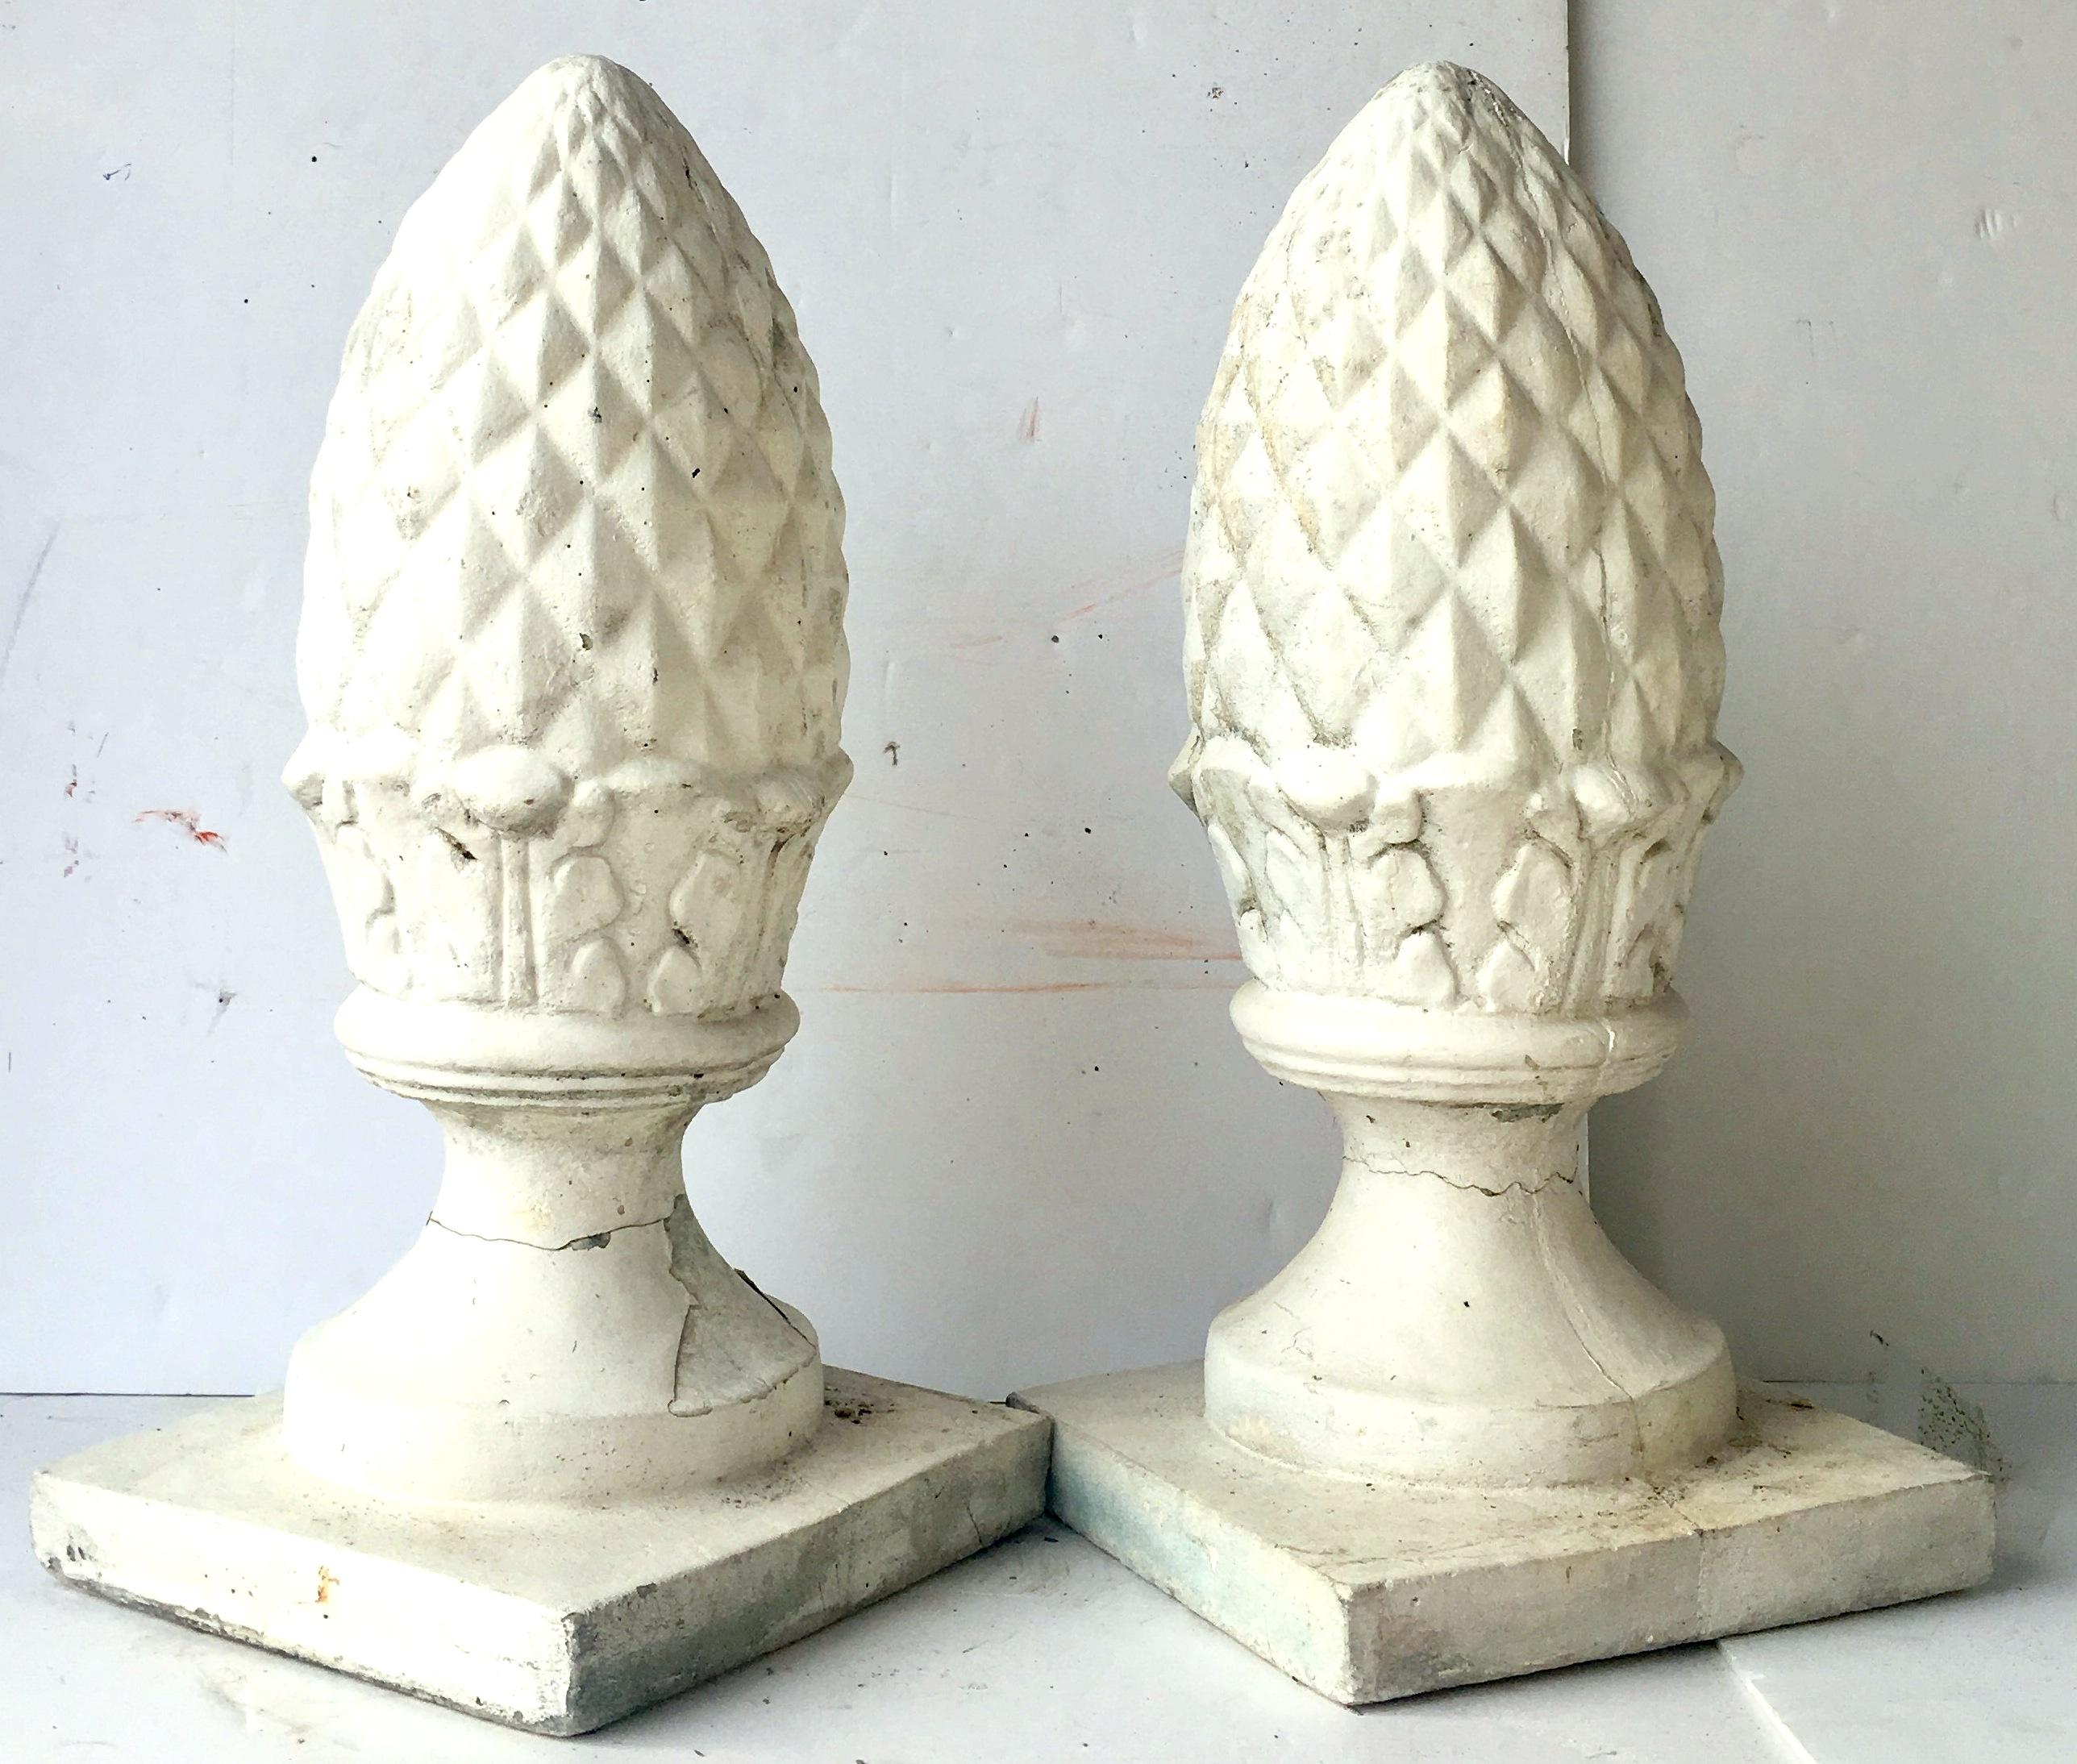 20th Century heavy cast stone square base textured cone finial sculptures.